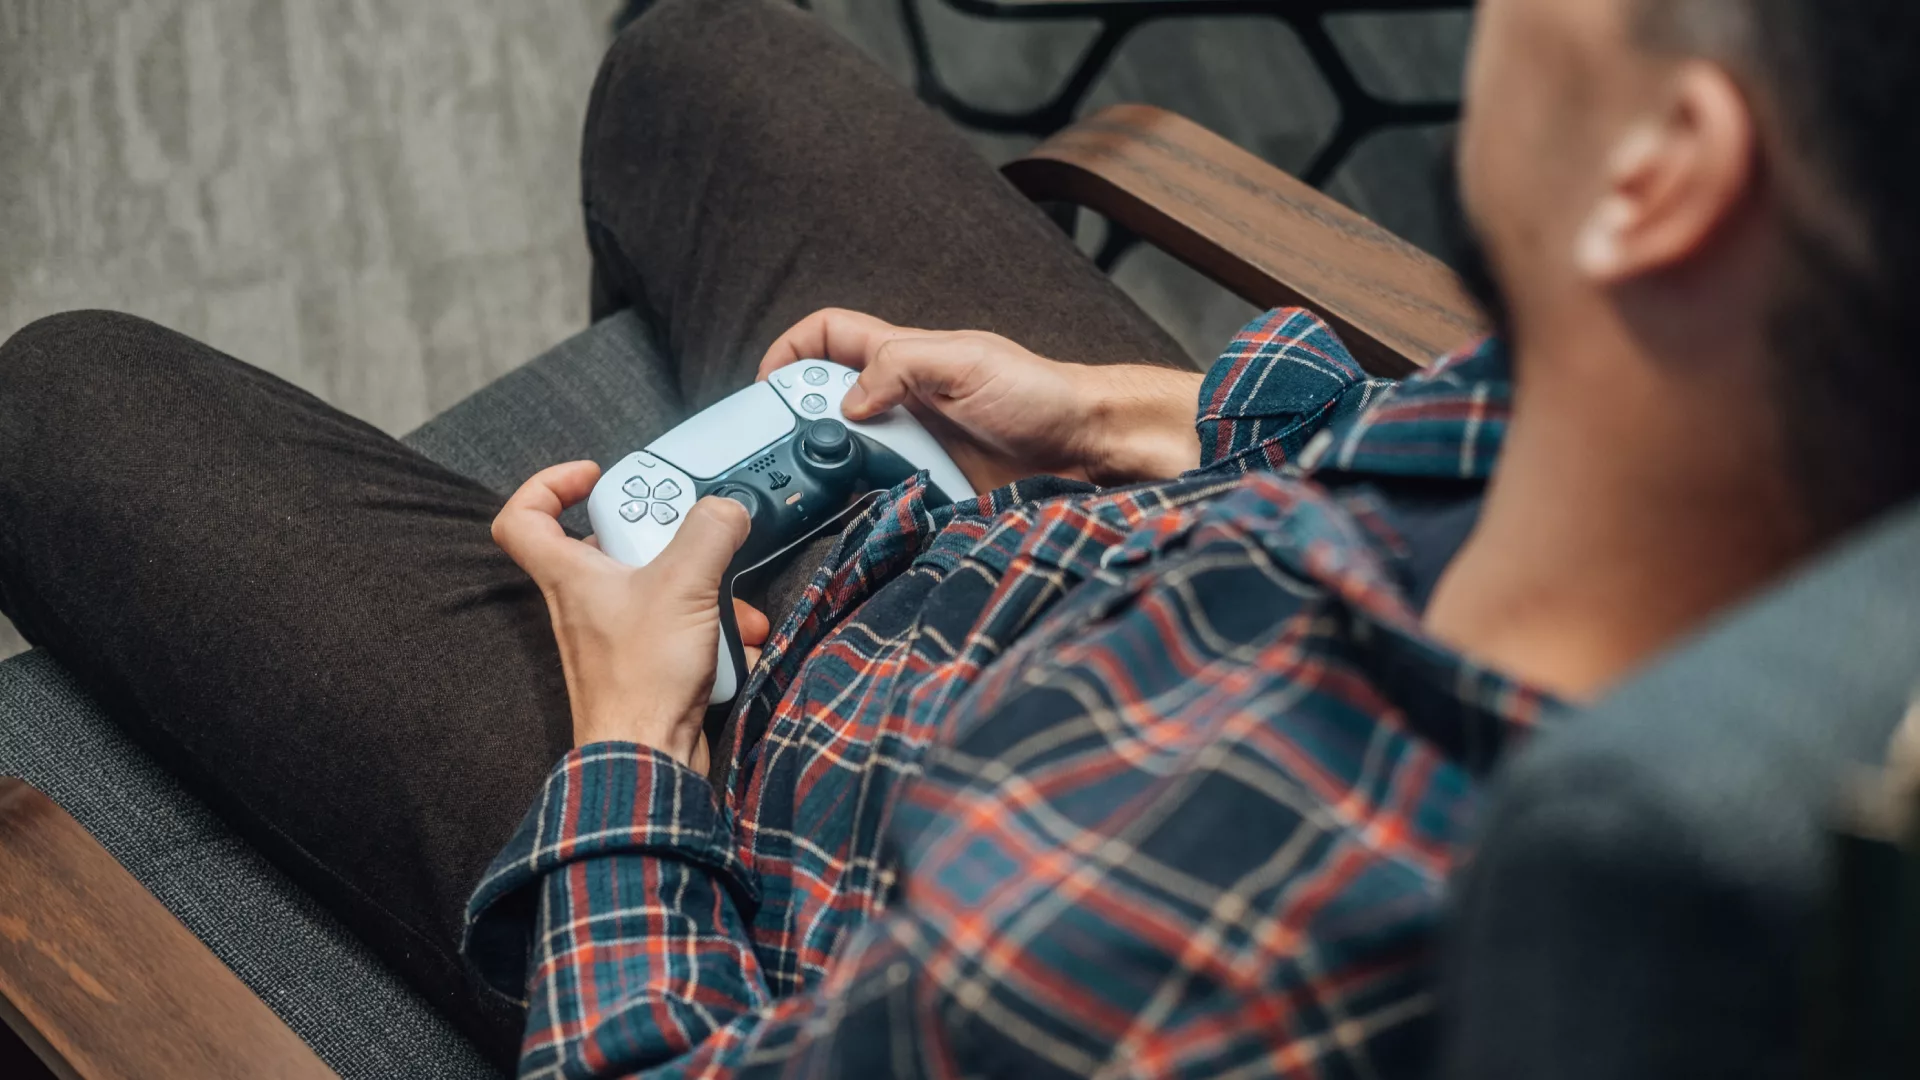 A man on a break at work holding a joystick and playing